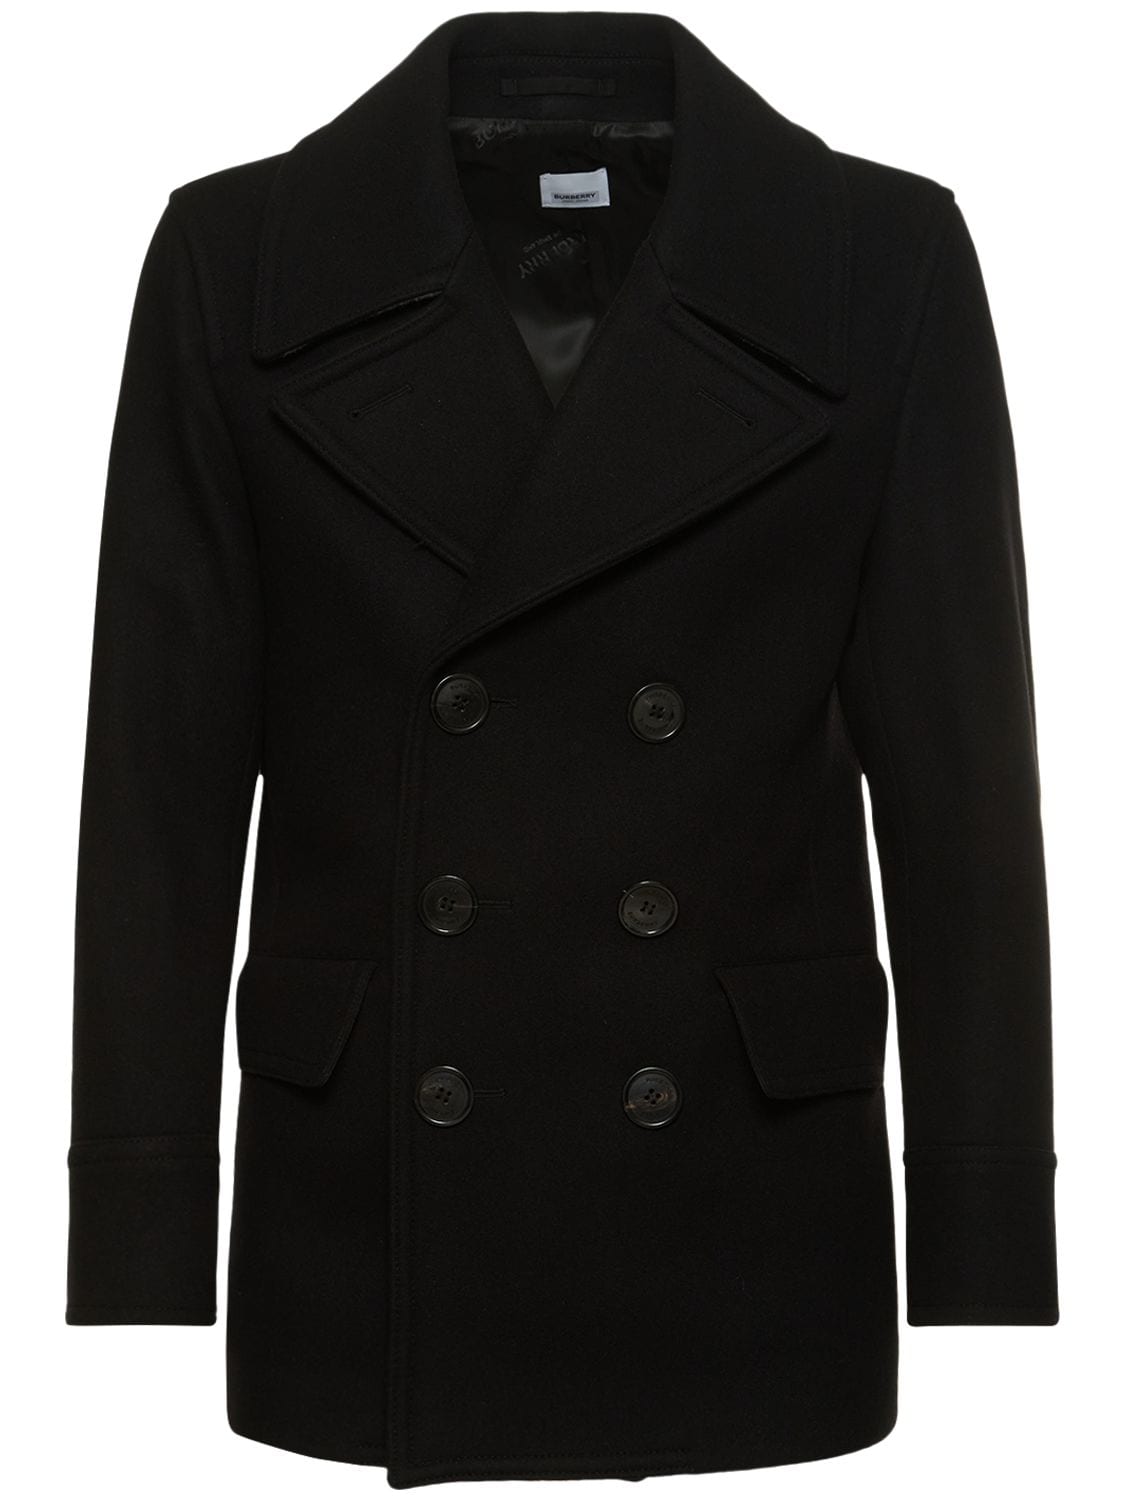 BURBERRY DOUBLE BREASTED WOOL BLEND PEACOAT